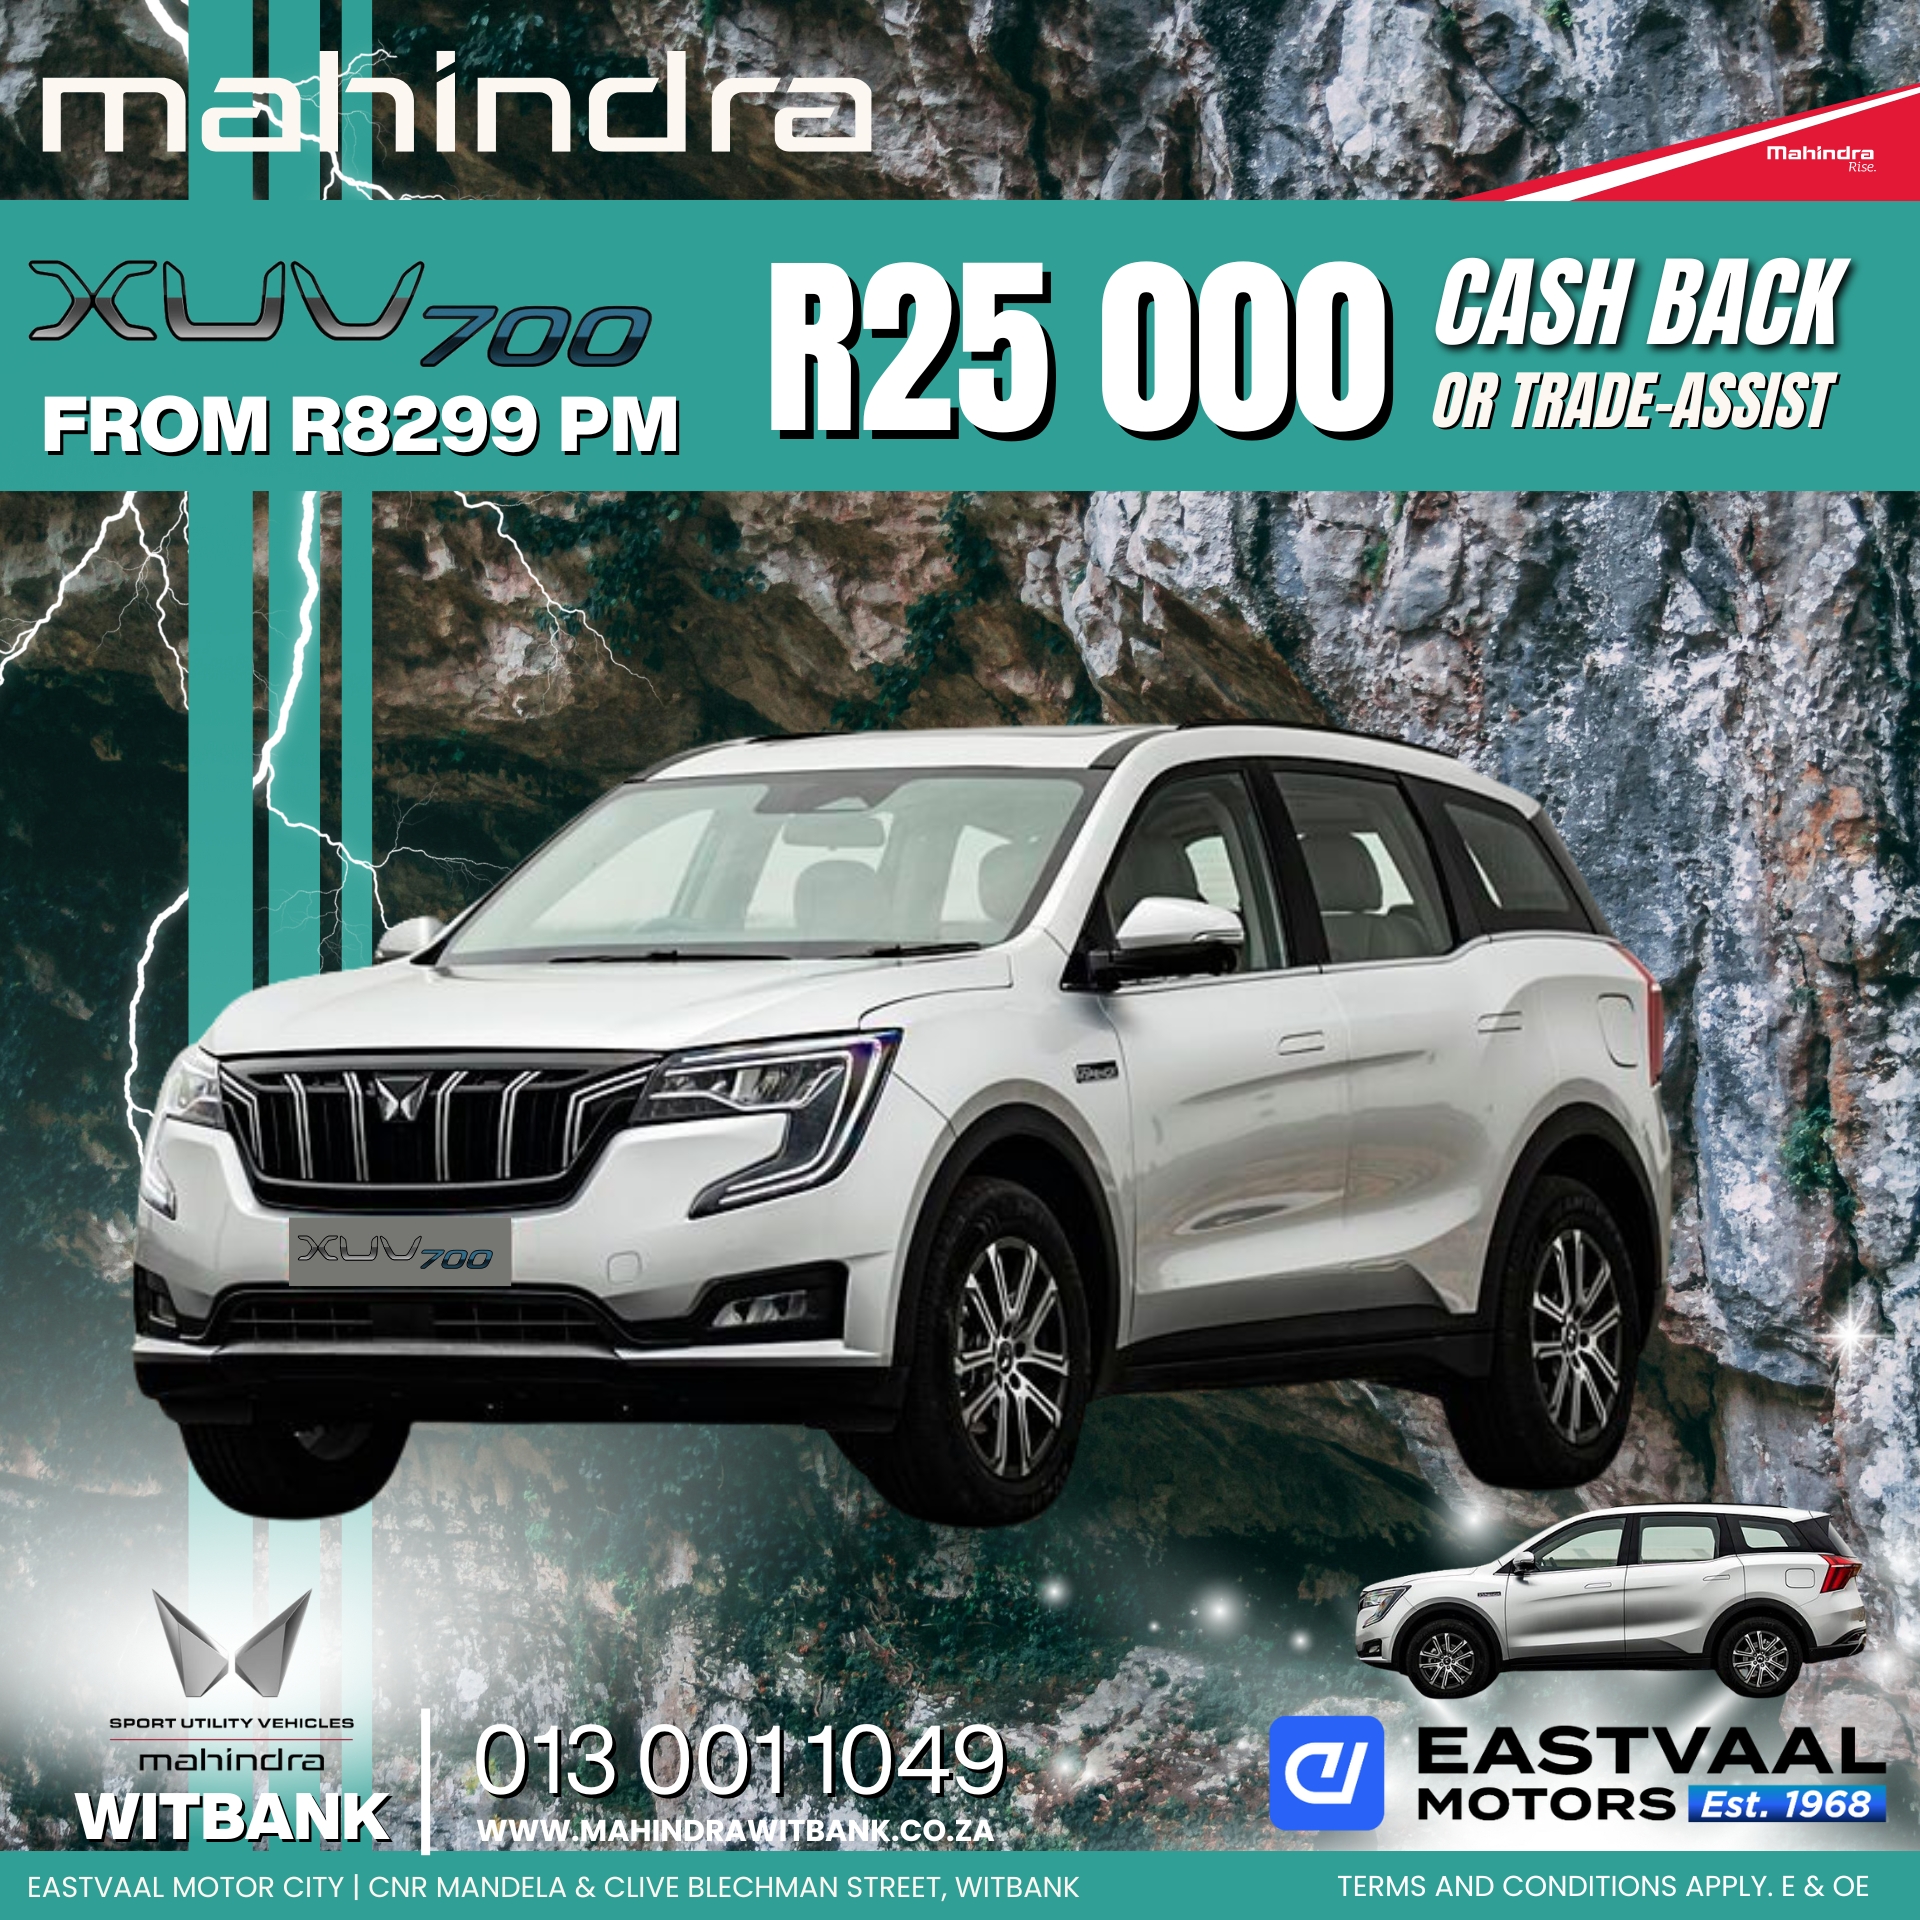 Kick off July in style with a brand new Mahindra from Eastvaal Motor City. Visit us now for amazing offers! image from Eastvaal Motors